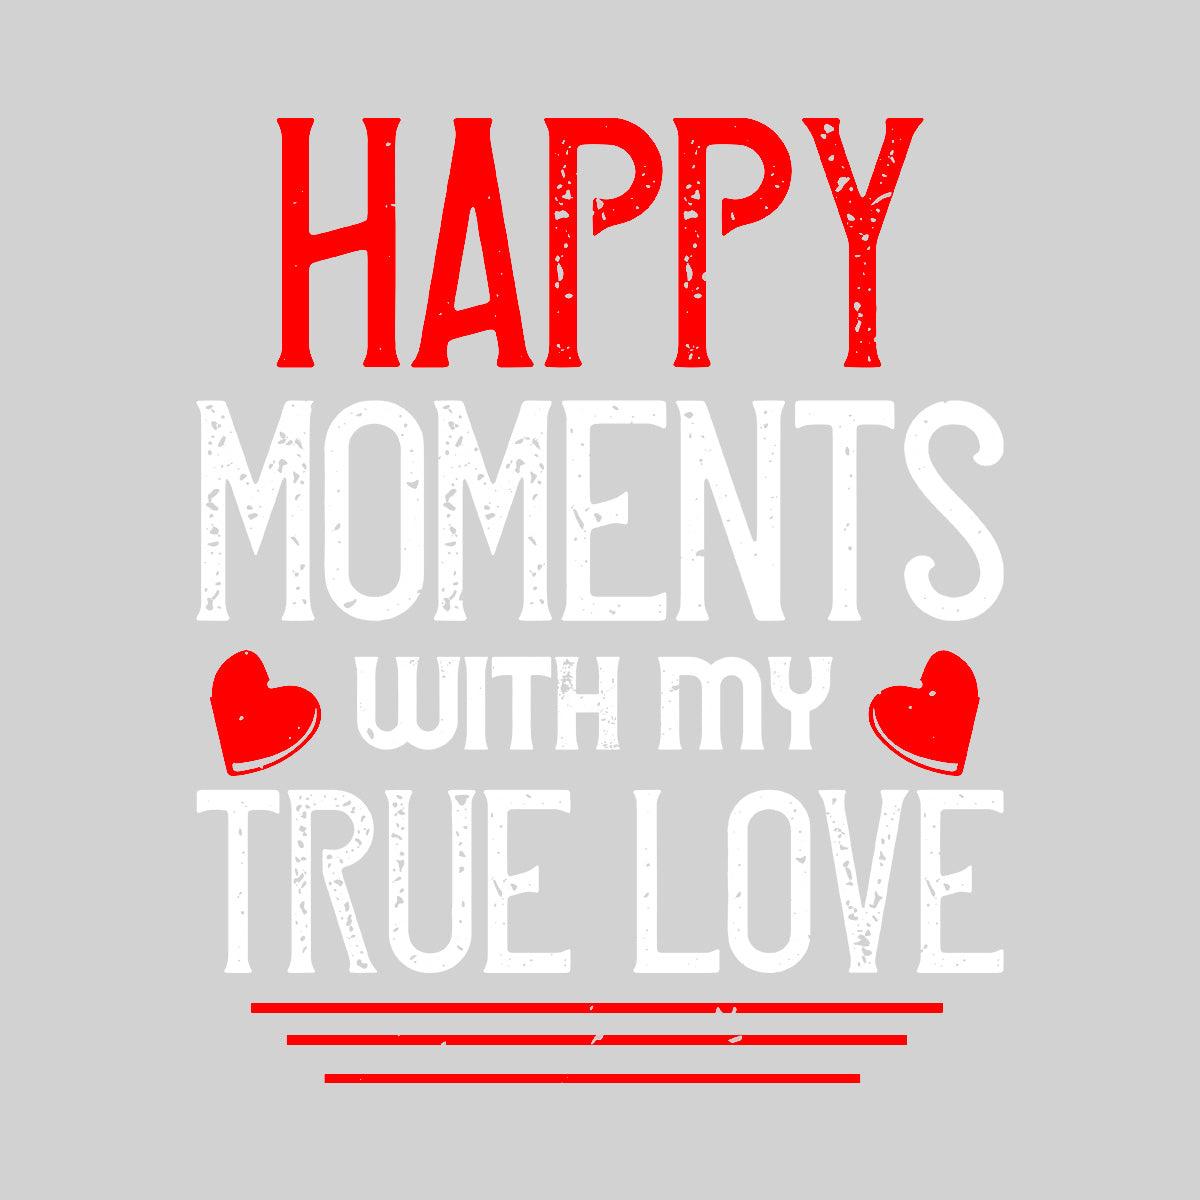 Happy moments with my true love - valentine's day T-shirt edition - Kuzi Tees